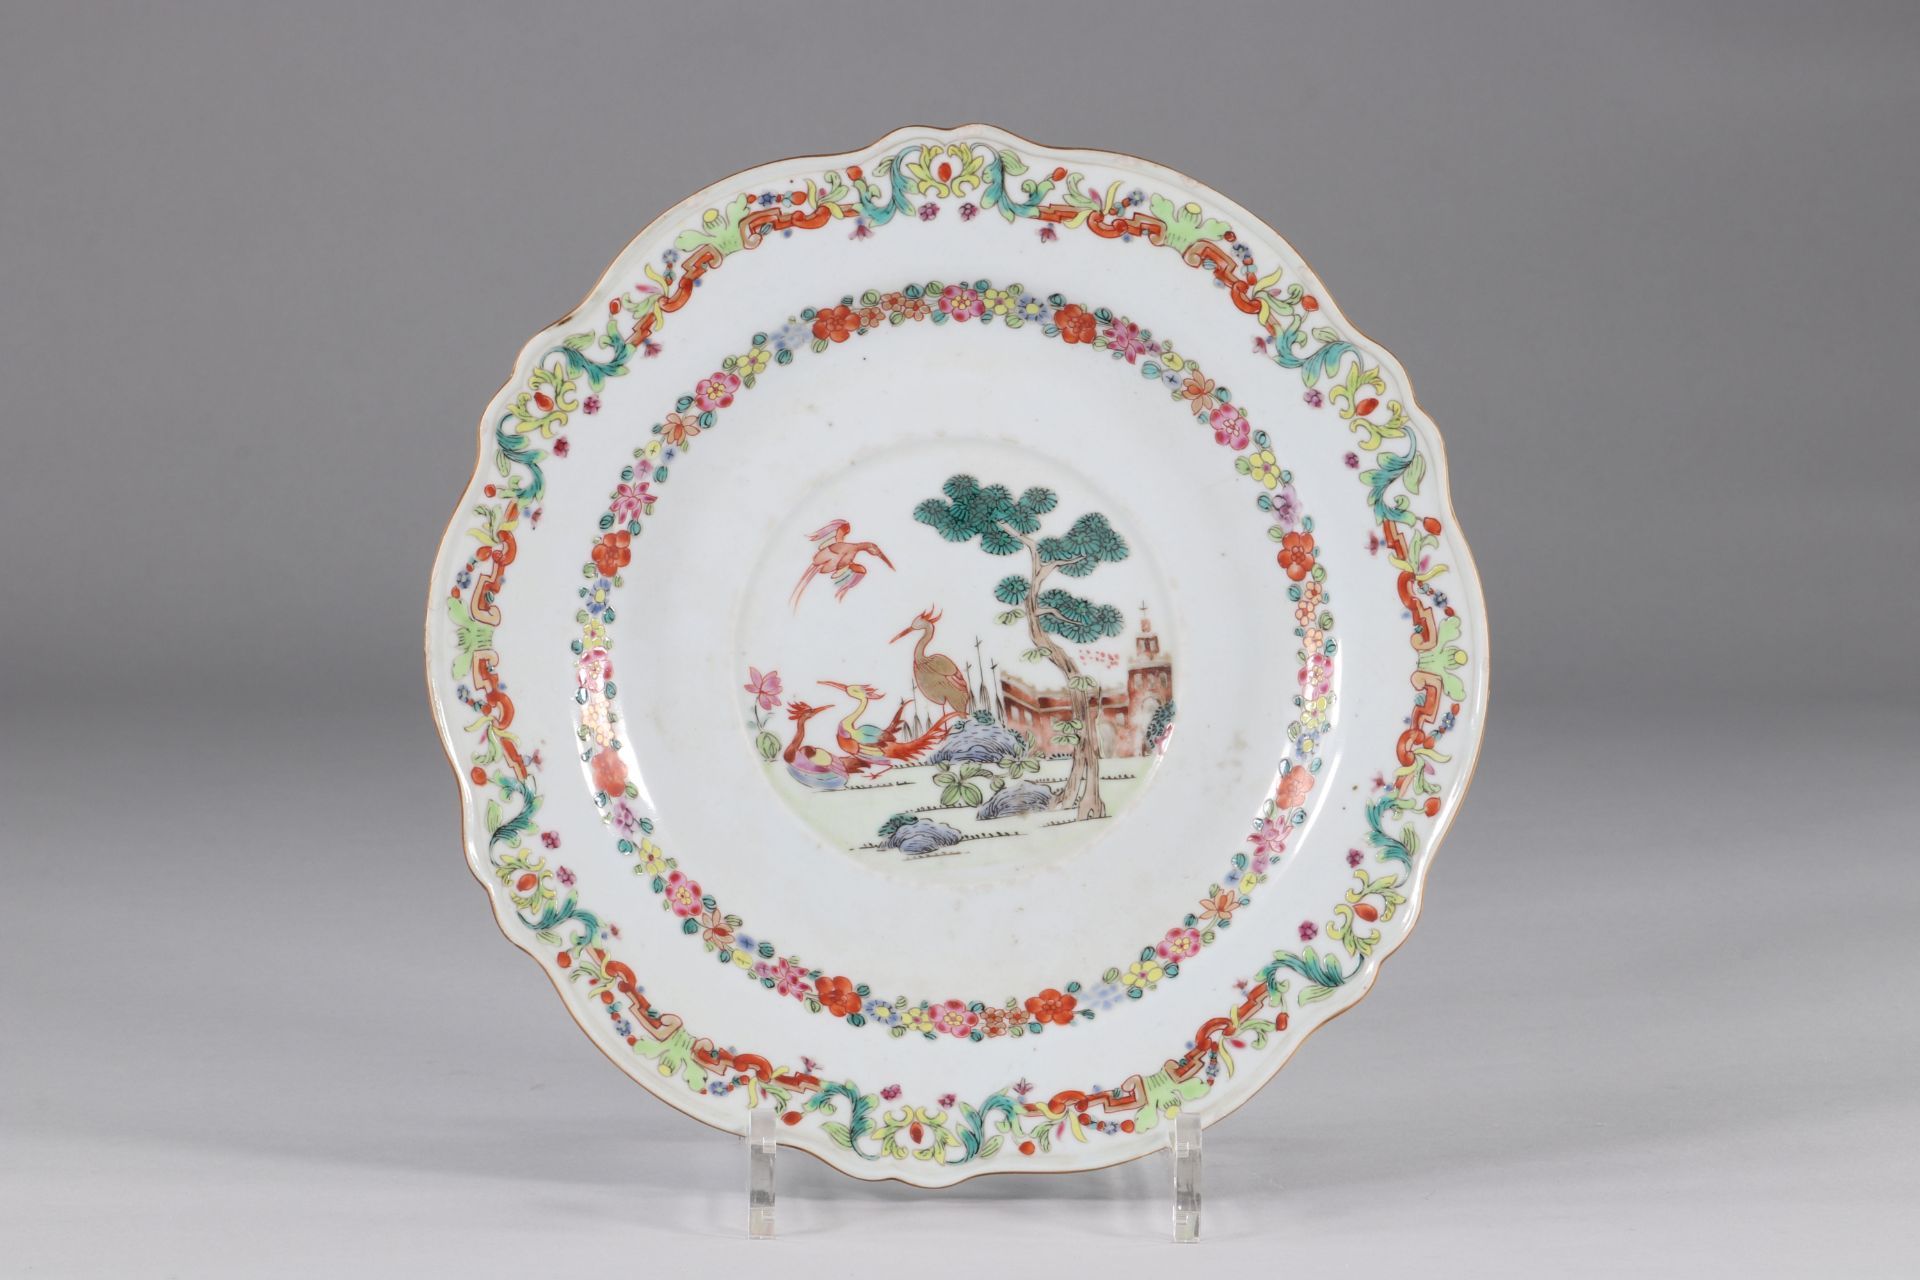 Porcelain plate from the famille rose "China to order".